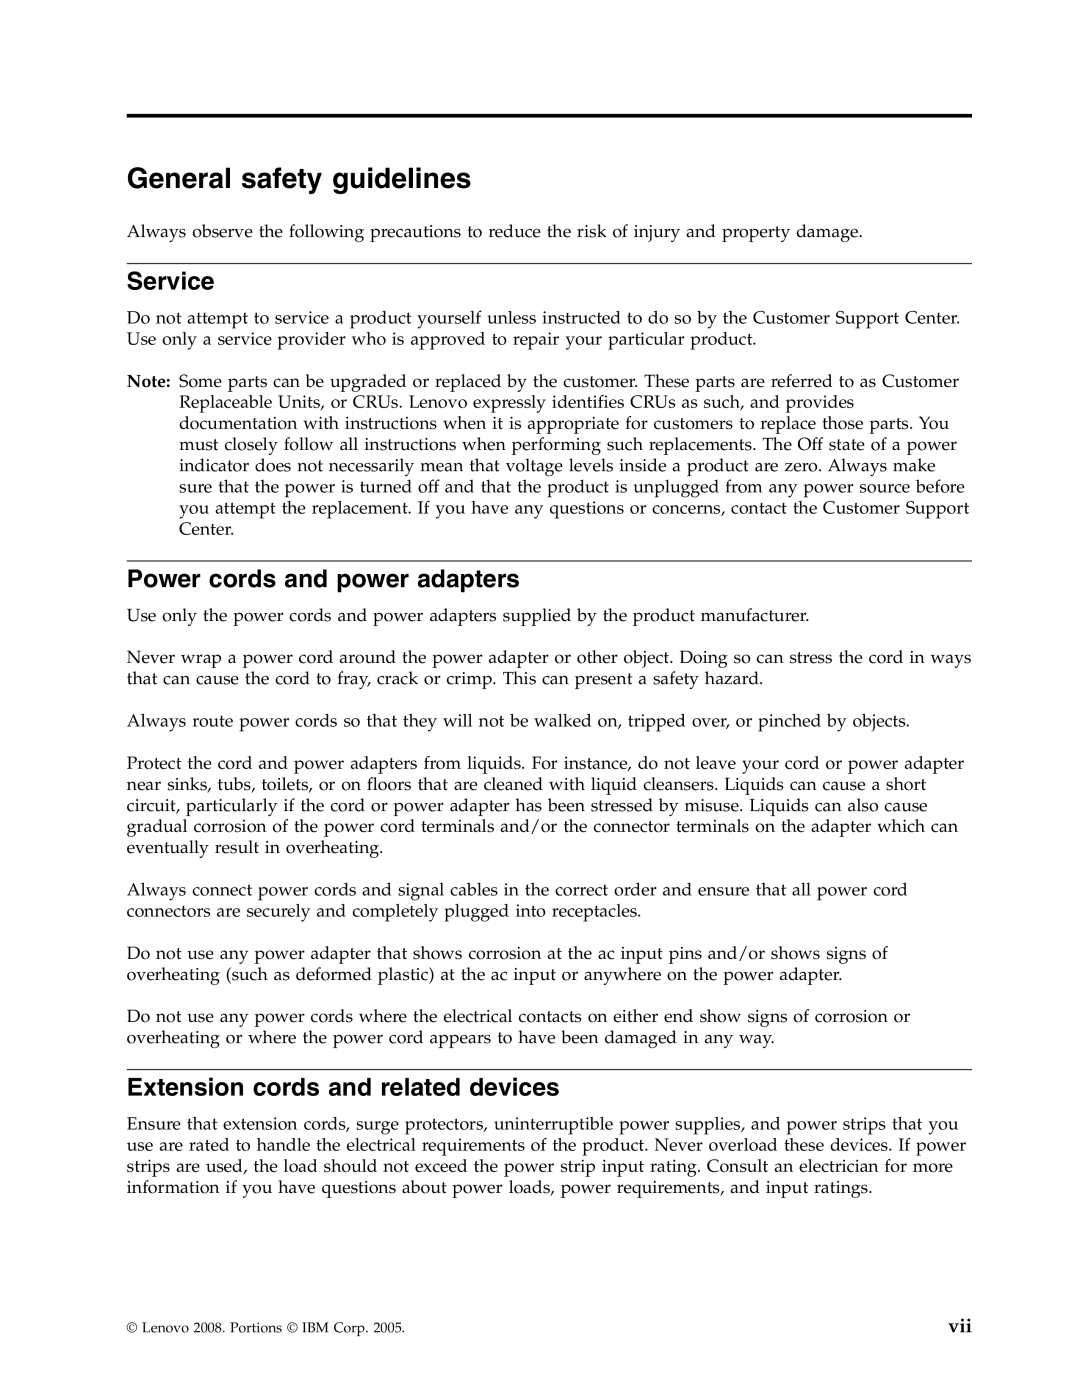 Lenovo 43N3222 General safety guidelines, Service, Power cords and power adapters, Extension cords and related devices 